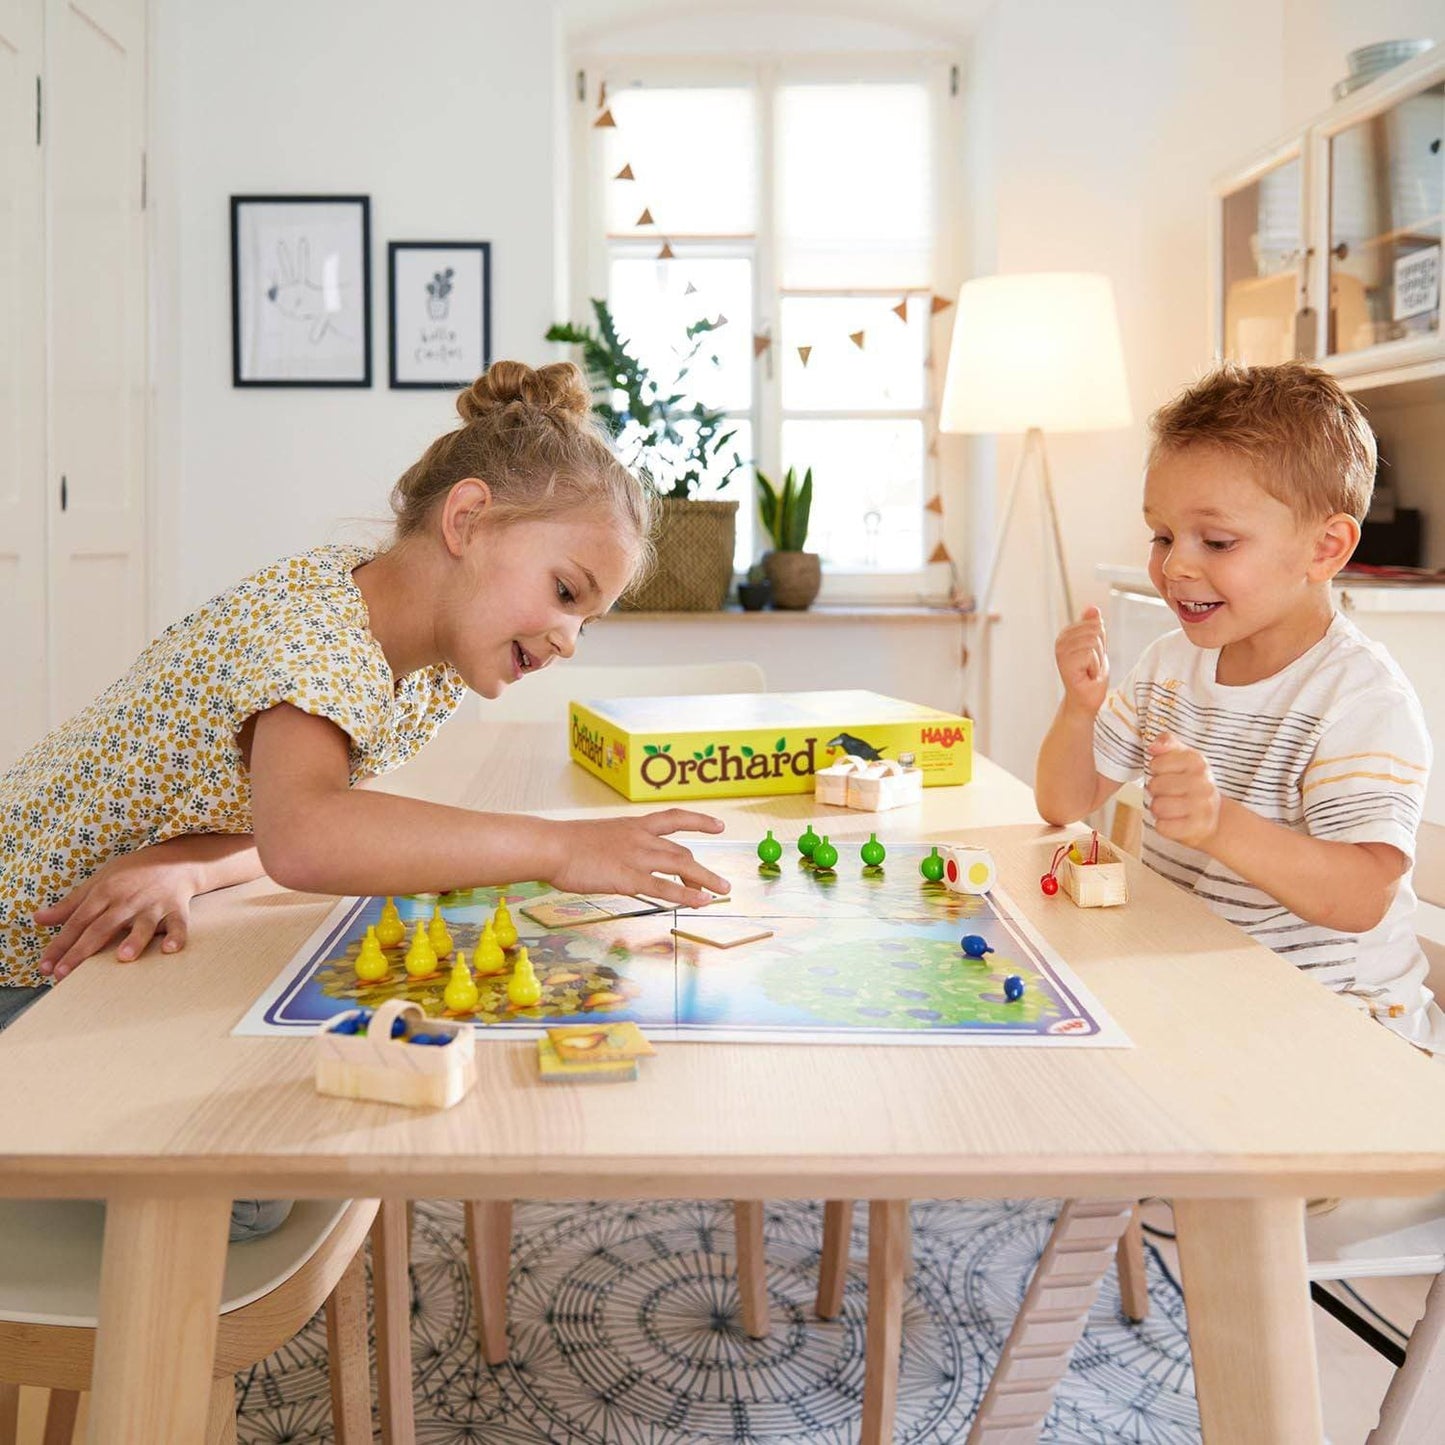 Orchard Cooperative Board Game by Haba